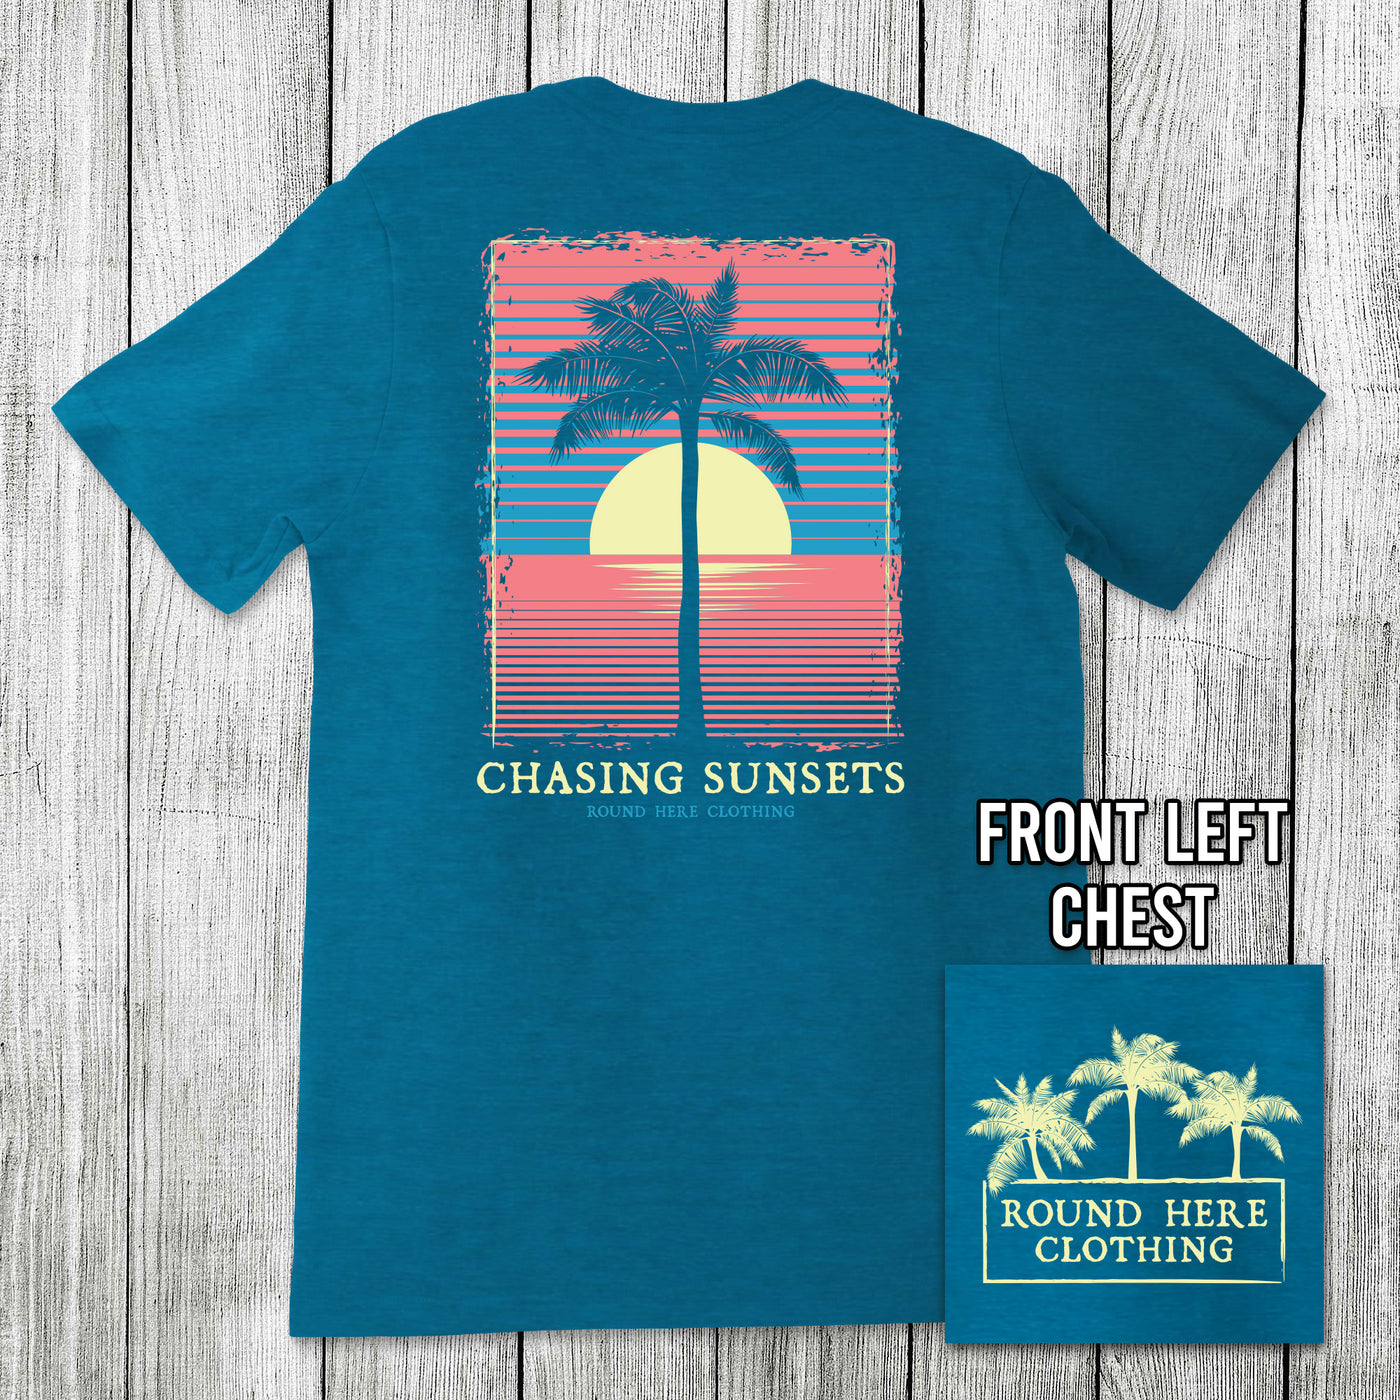 'Round Here Clothing Chasing Sunsets